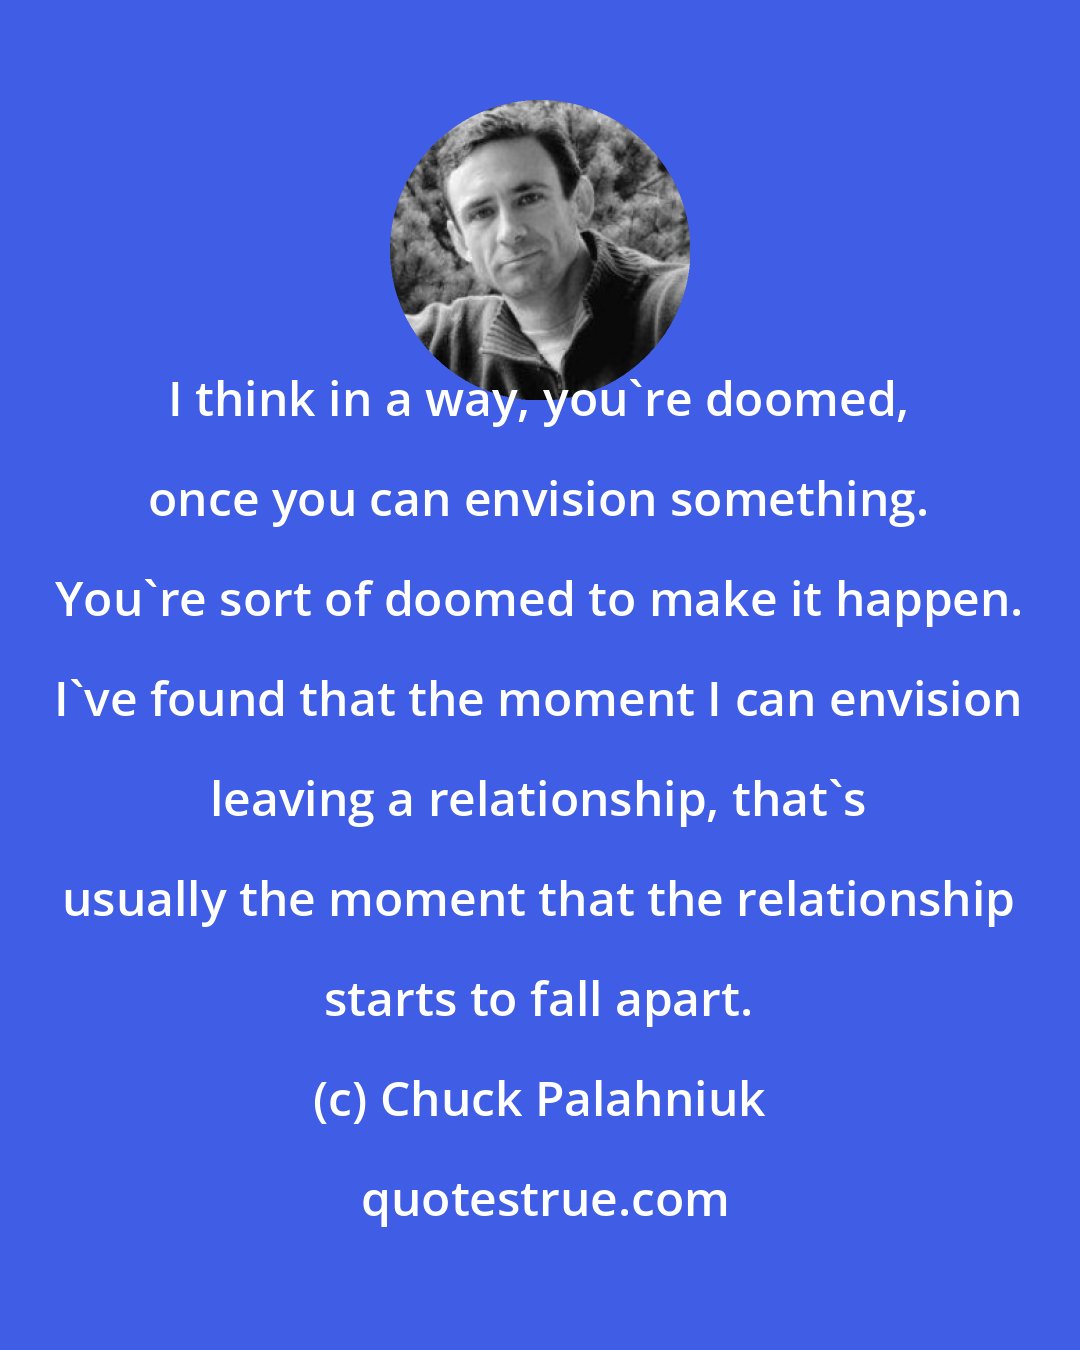 Chuck Palahniuk: I think in a way, you're doomed, once you can envision something. You're sort of doomed to make it happen. I've found that the moment I can envision leaving a relationship, that's usually the moment that the relationship starts to fall apart.